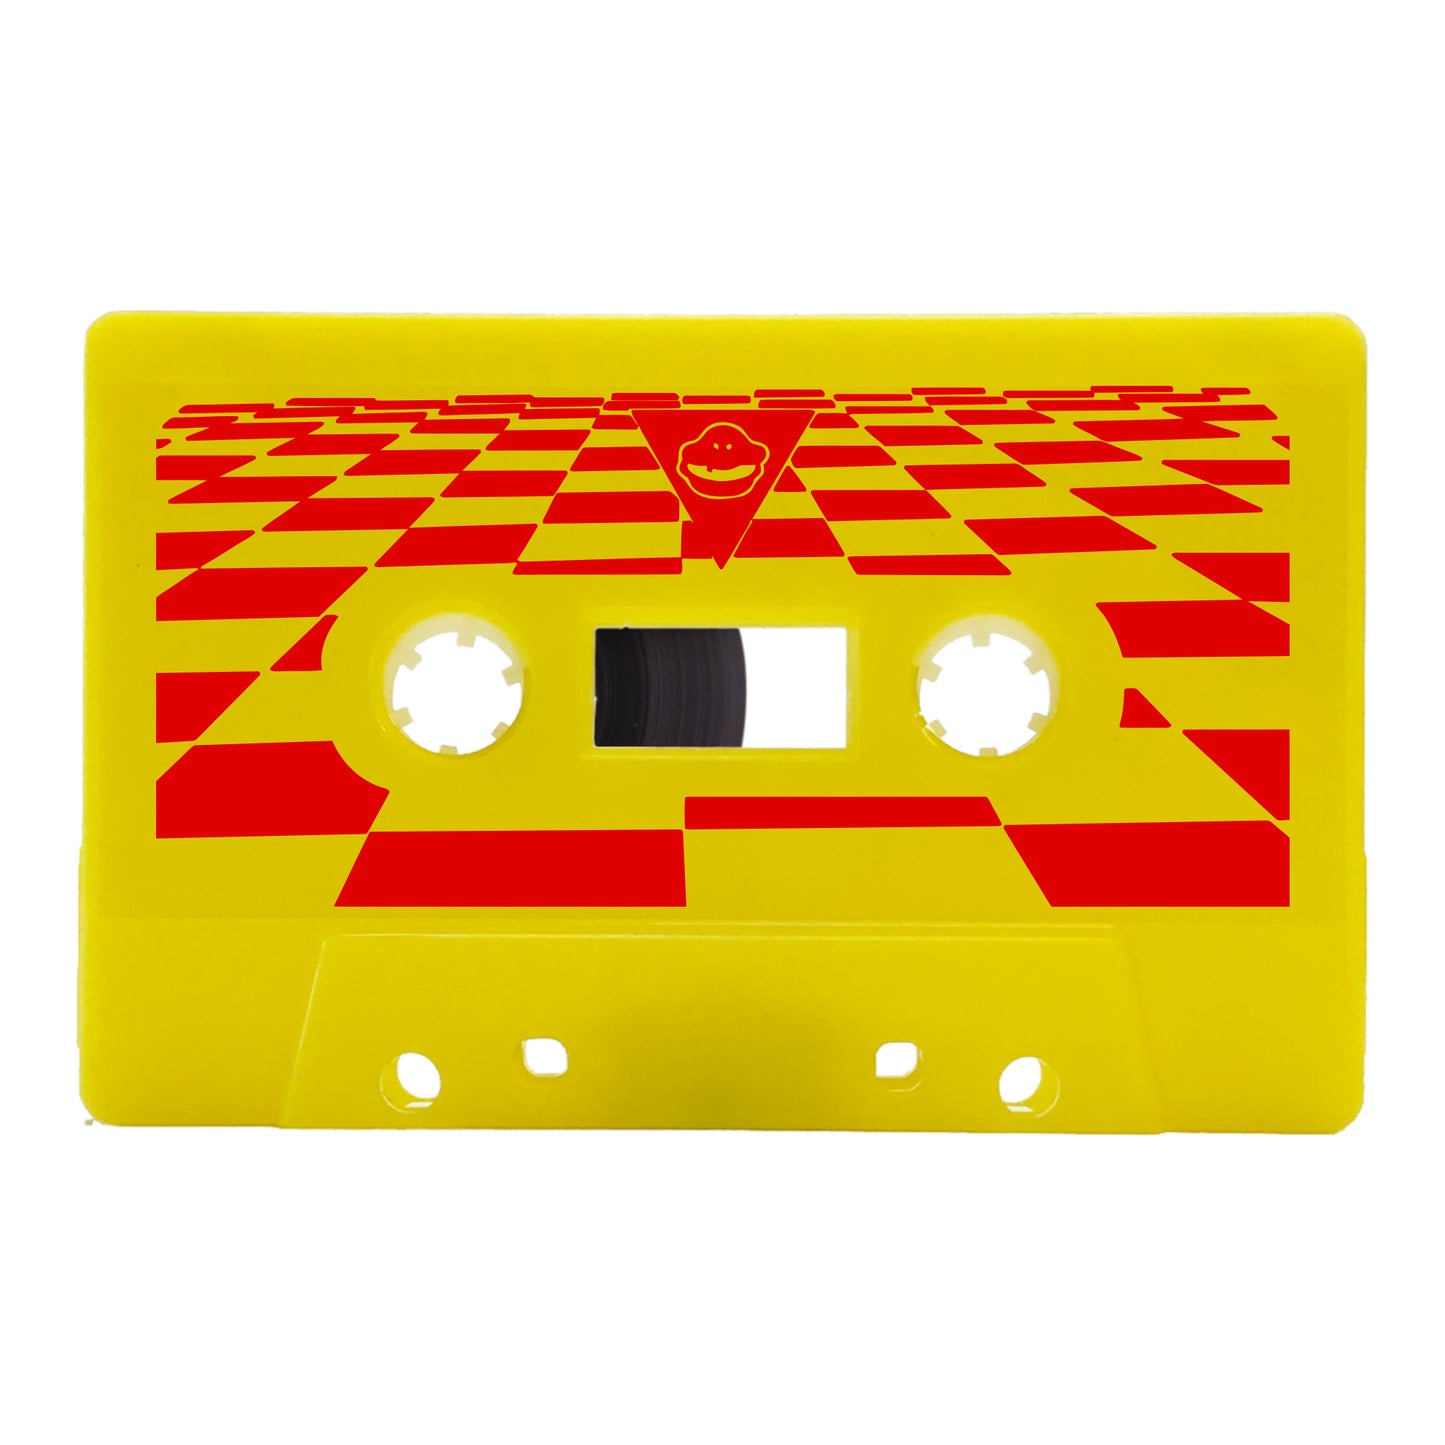 Burgy Beats - "Burger Jointe'" Limited Edition Cassette Tape